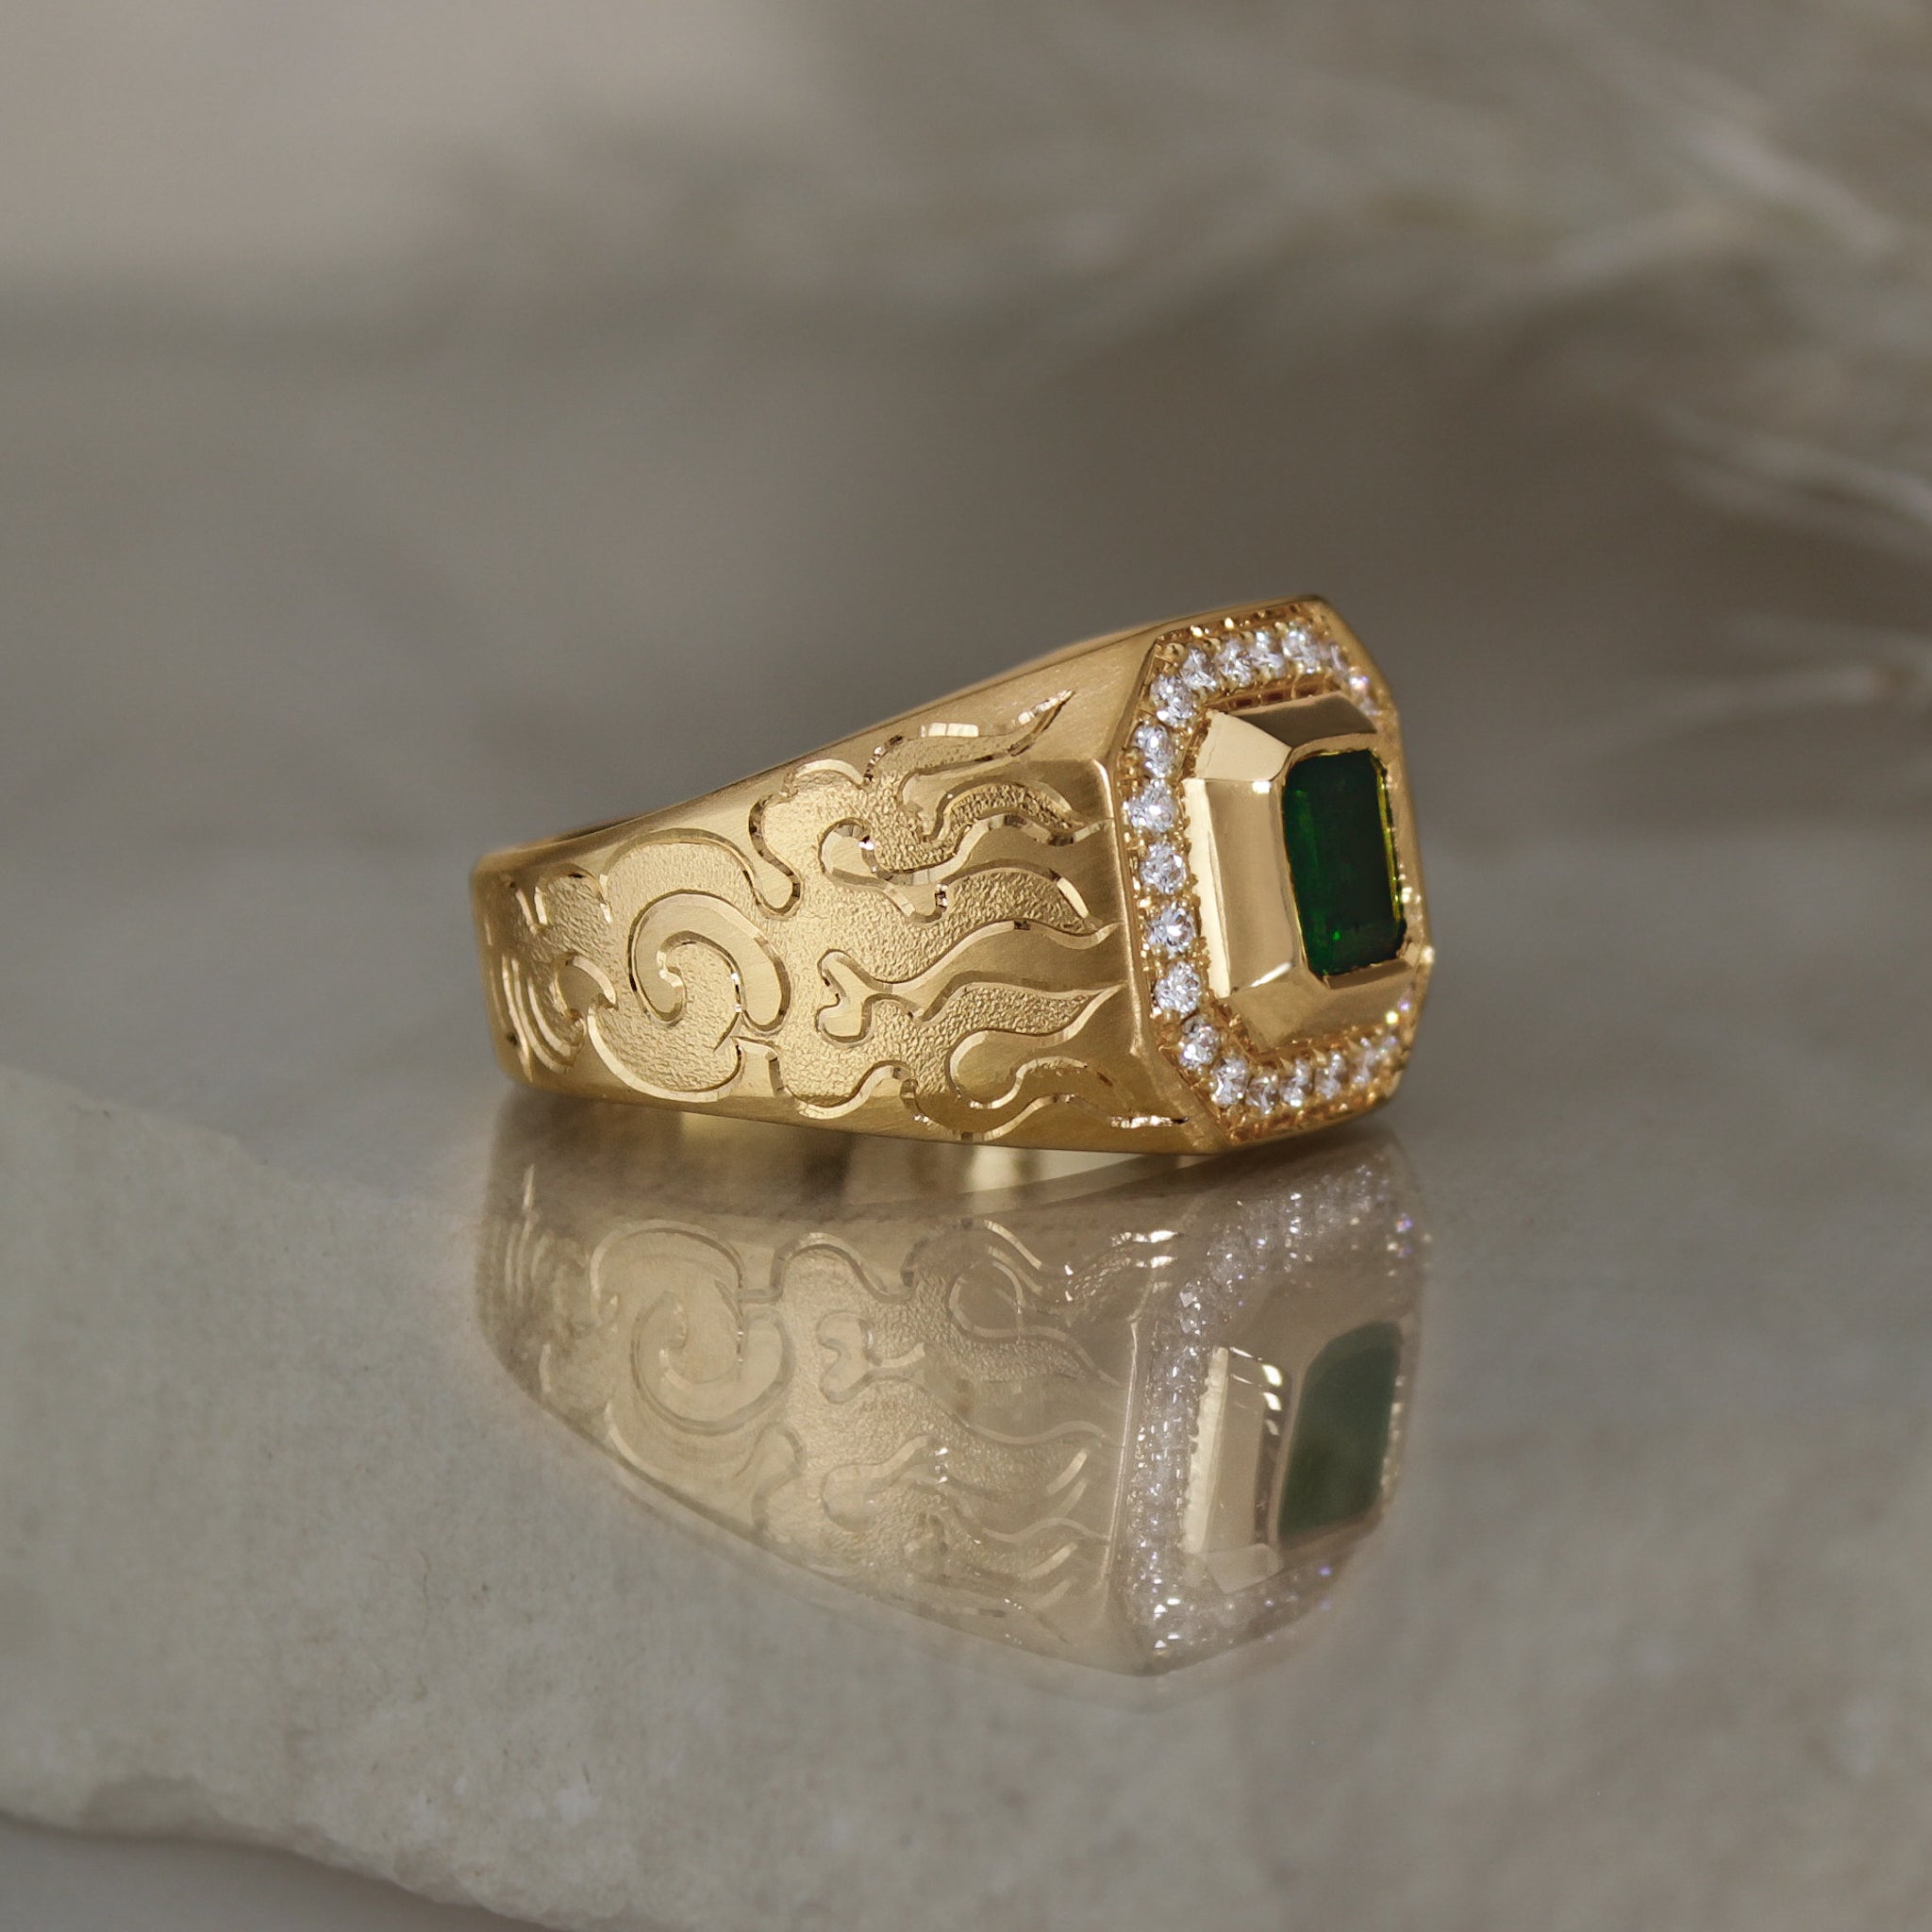 signet style 14k yellow gold ring with a green tourmaline square shape bezel set followed by a diamond halo with cut corners, engraved with fire on the side